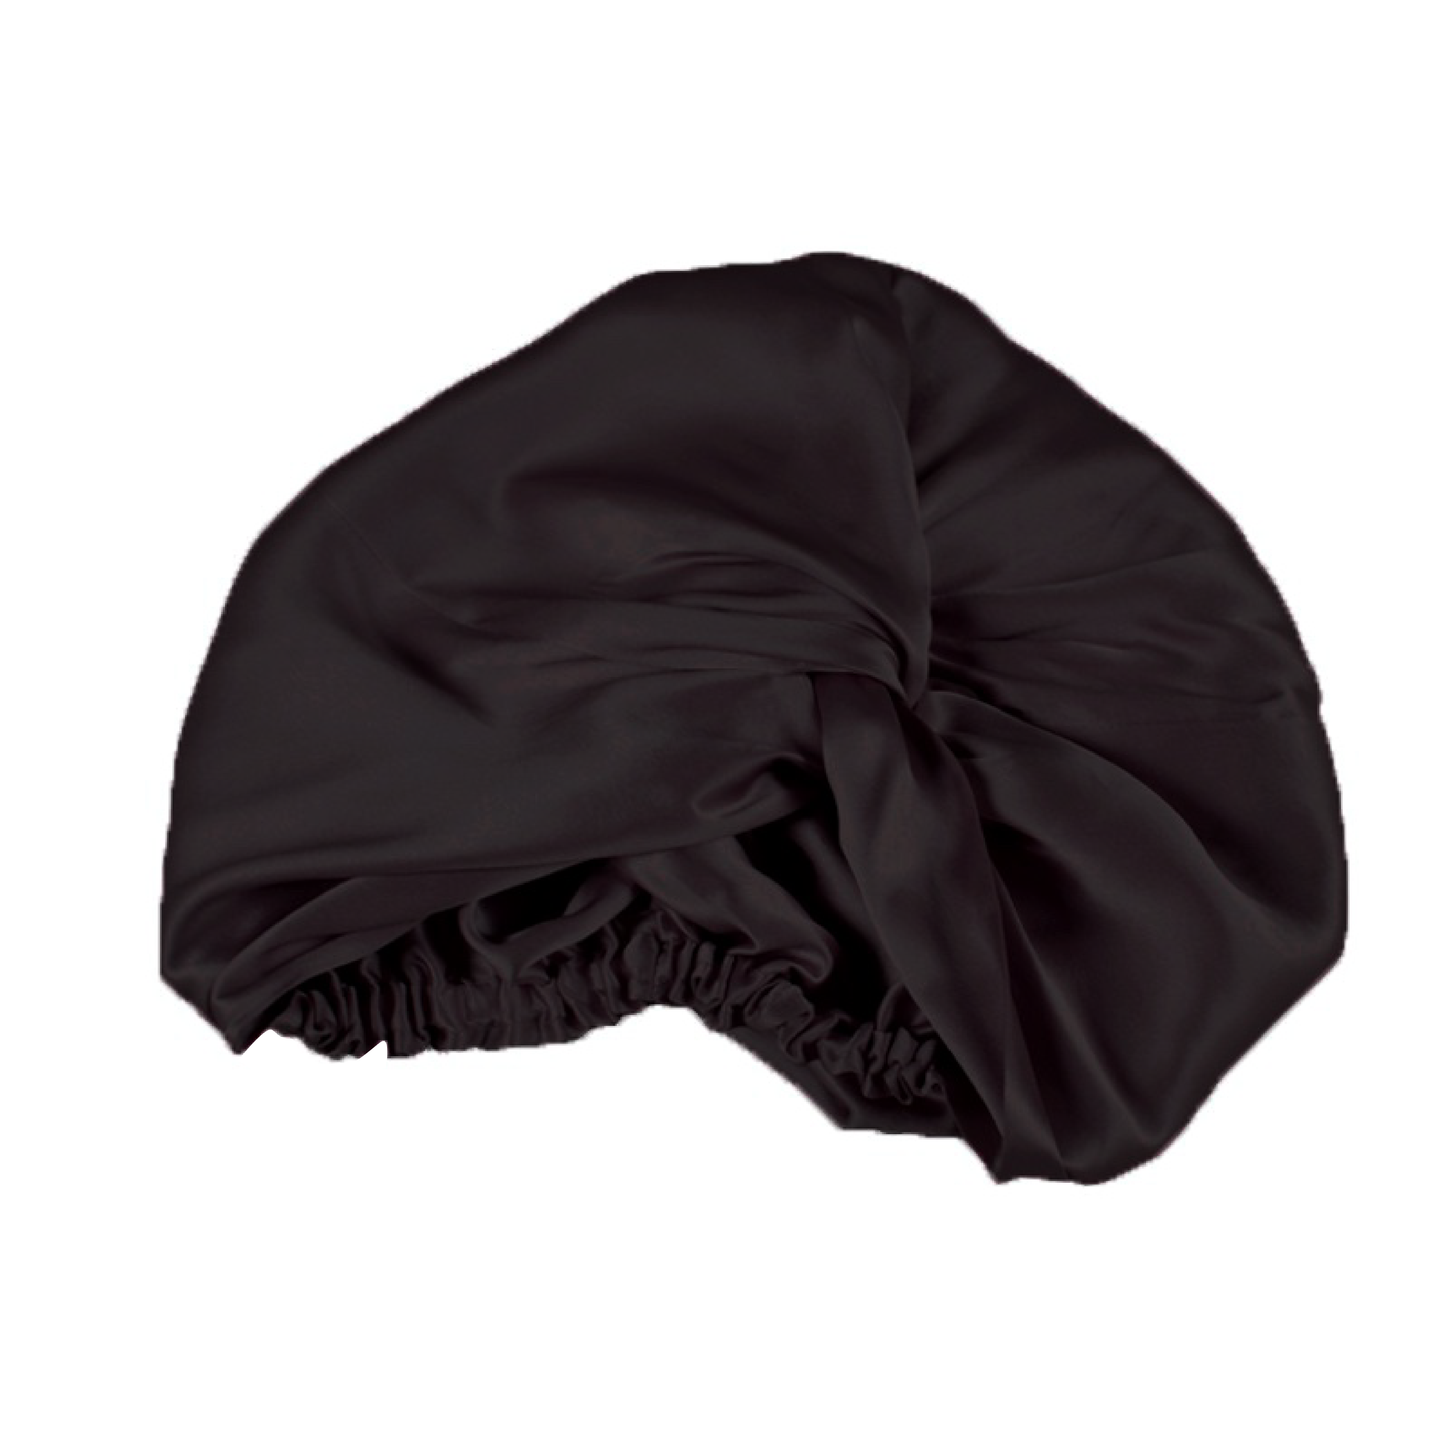 100% Pure Mulberry Silk hair Turban in Black. Mulberry silk is less absorbent than any other fabric, leaving hair more hydrated, glowing, and healthier